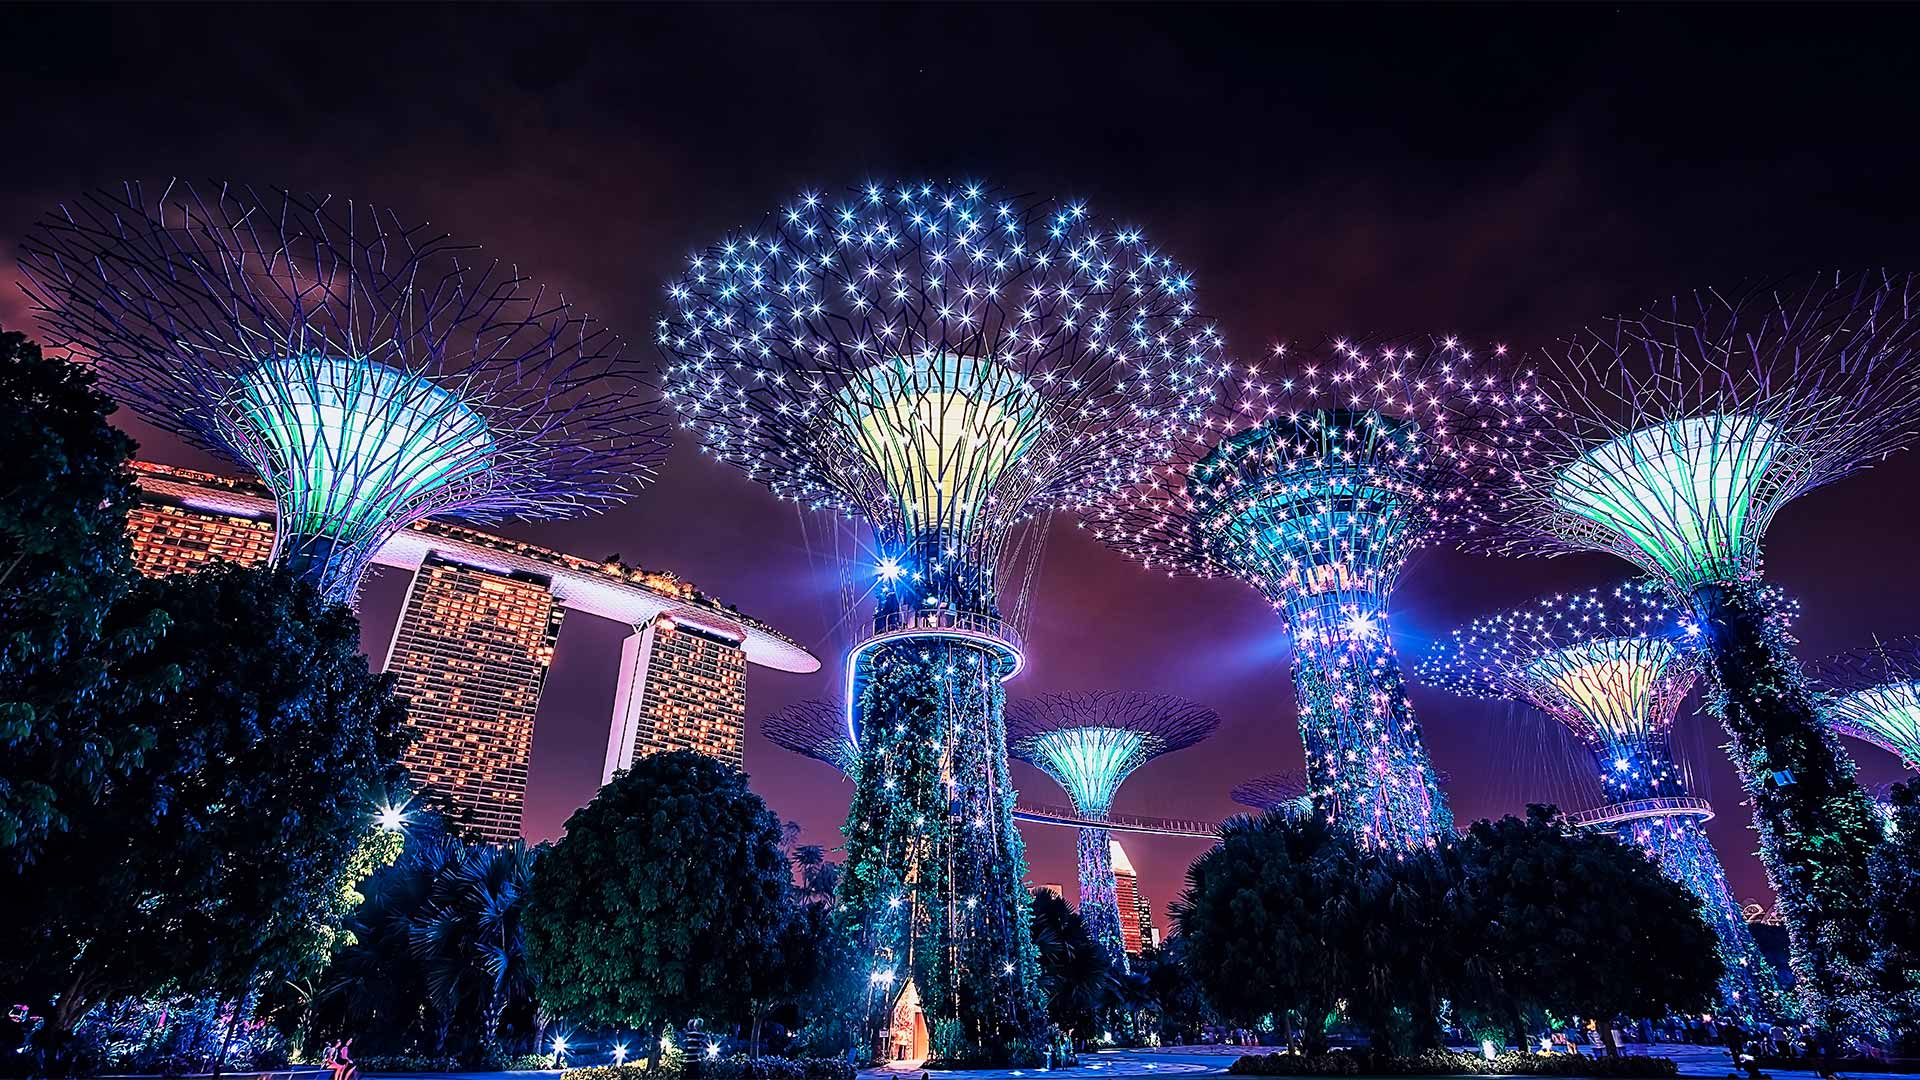 Lighted supertress at Gardens by the Bay, located in front of Marina Bay Sands, Singapore